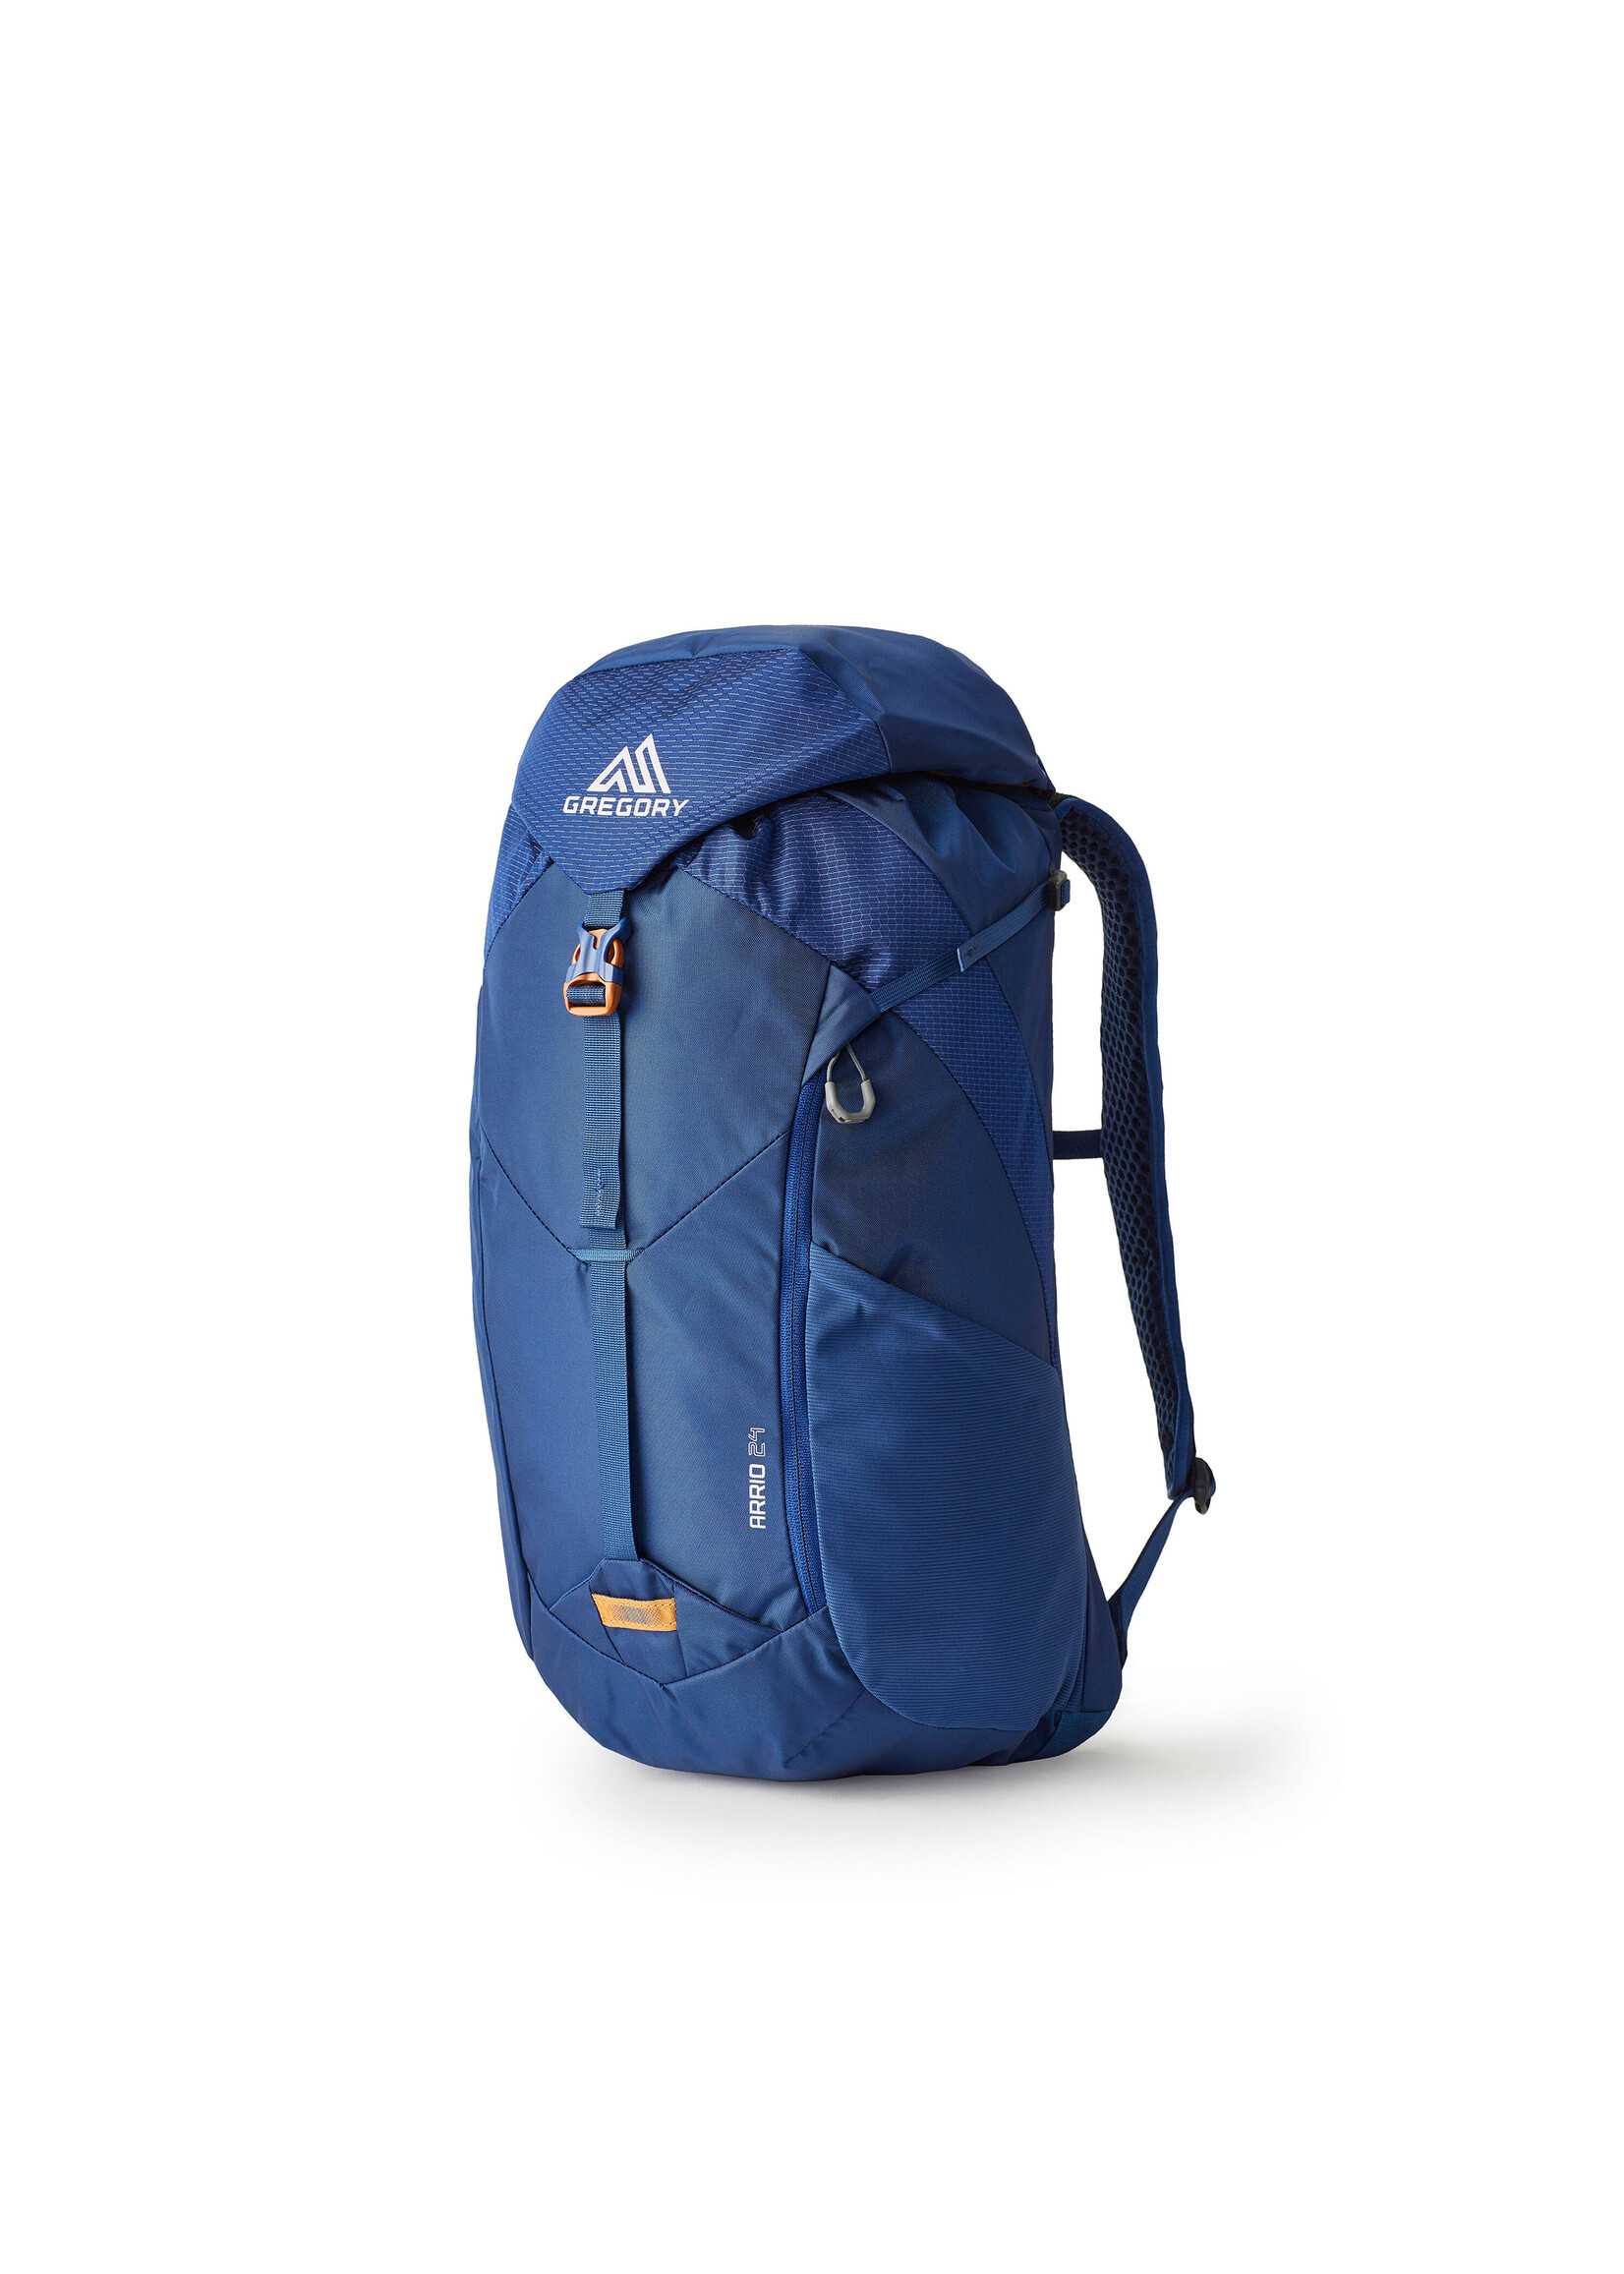 Gregory Arrio 24 Backpack - Empire Blue